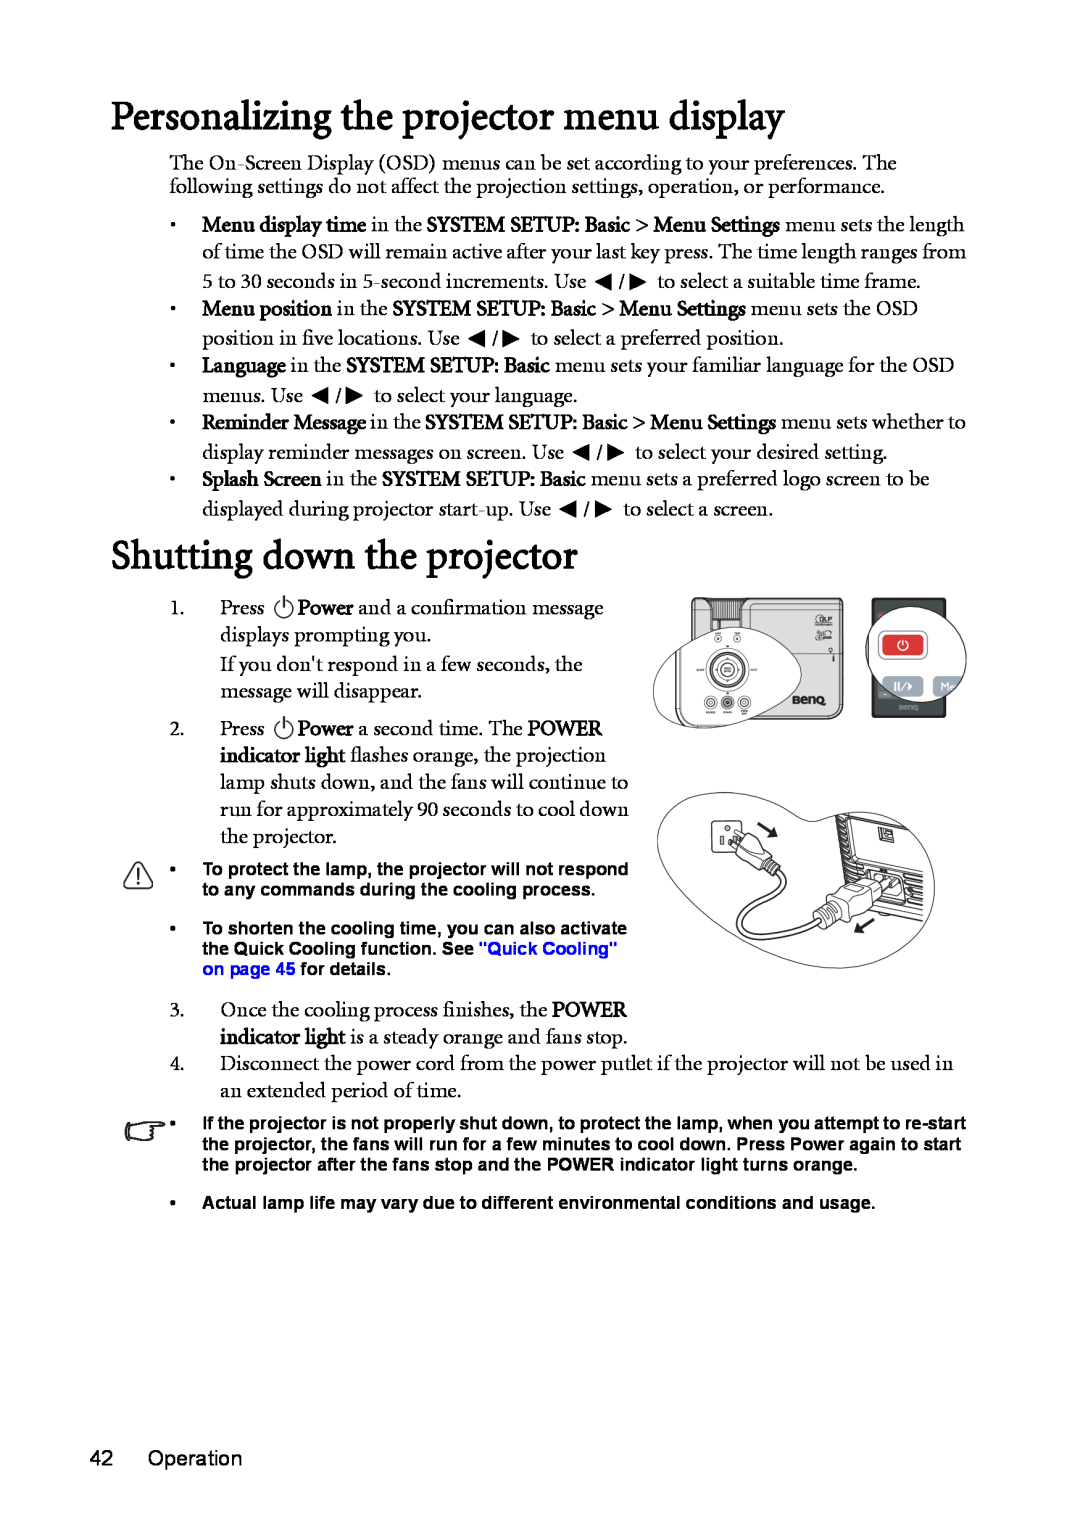 BenQ MX511 user manual Personalizing the projector menu display, Shutting down the projector 